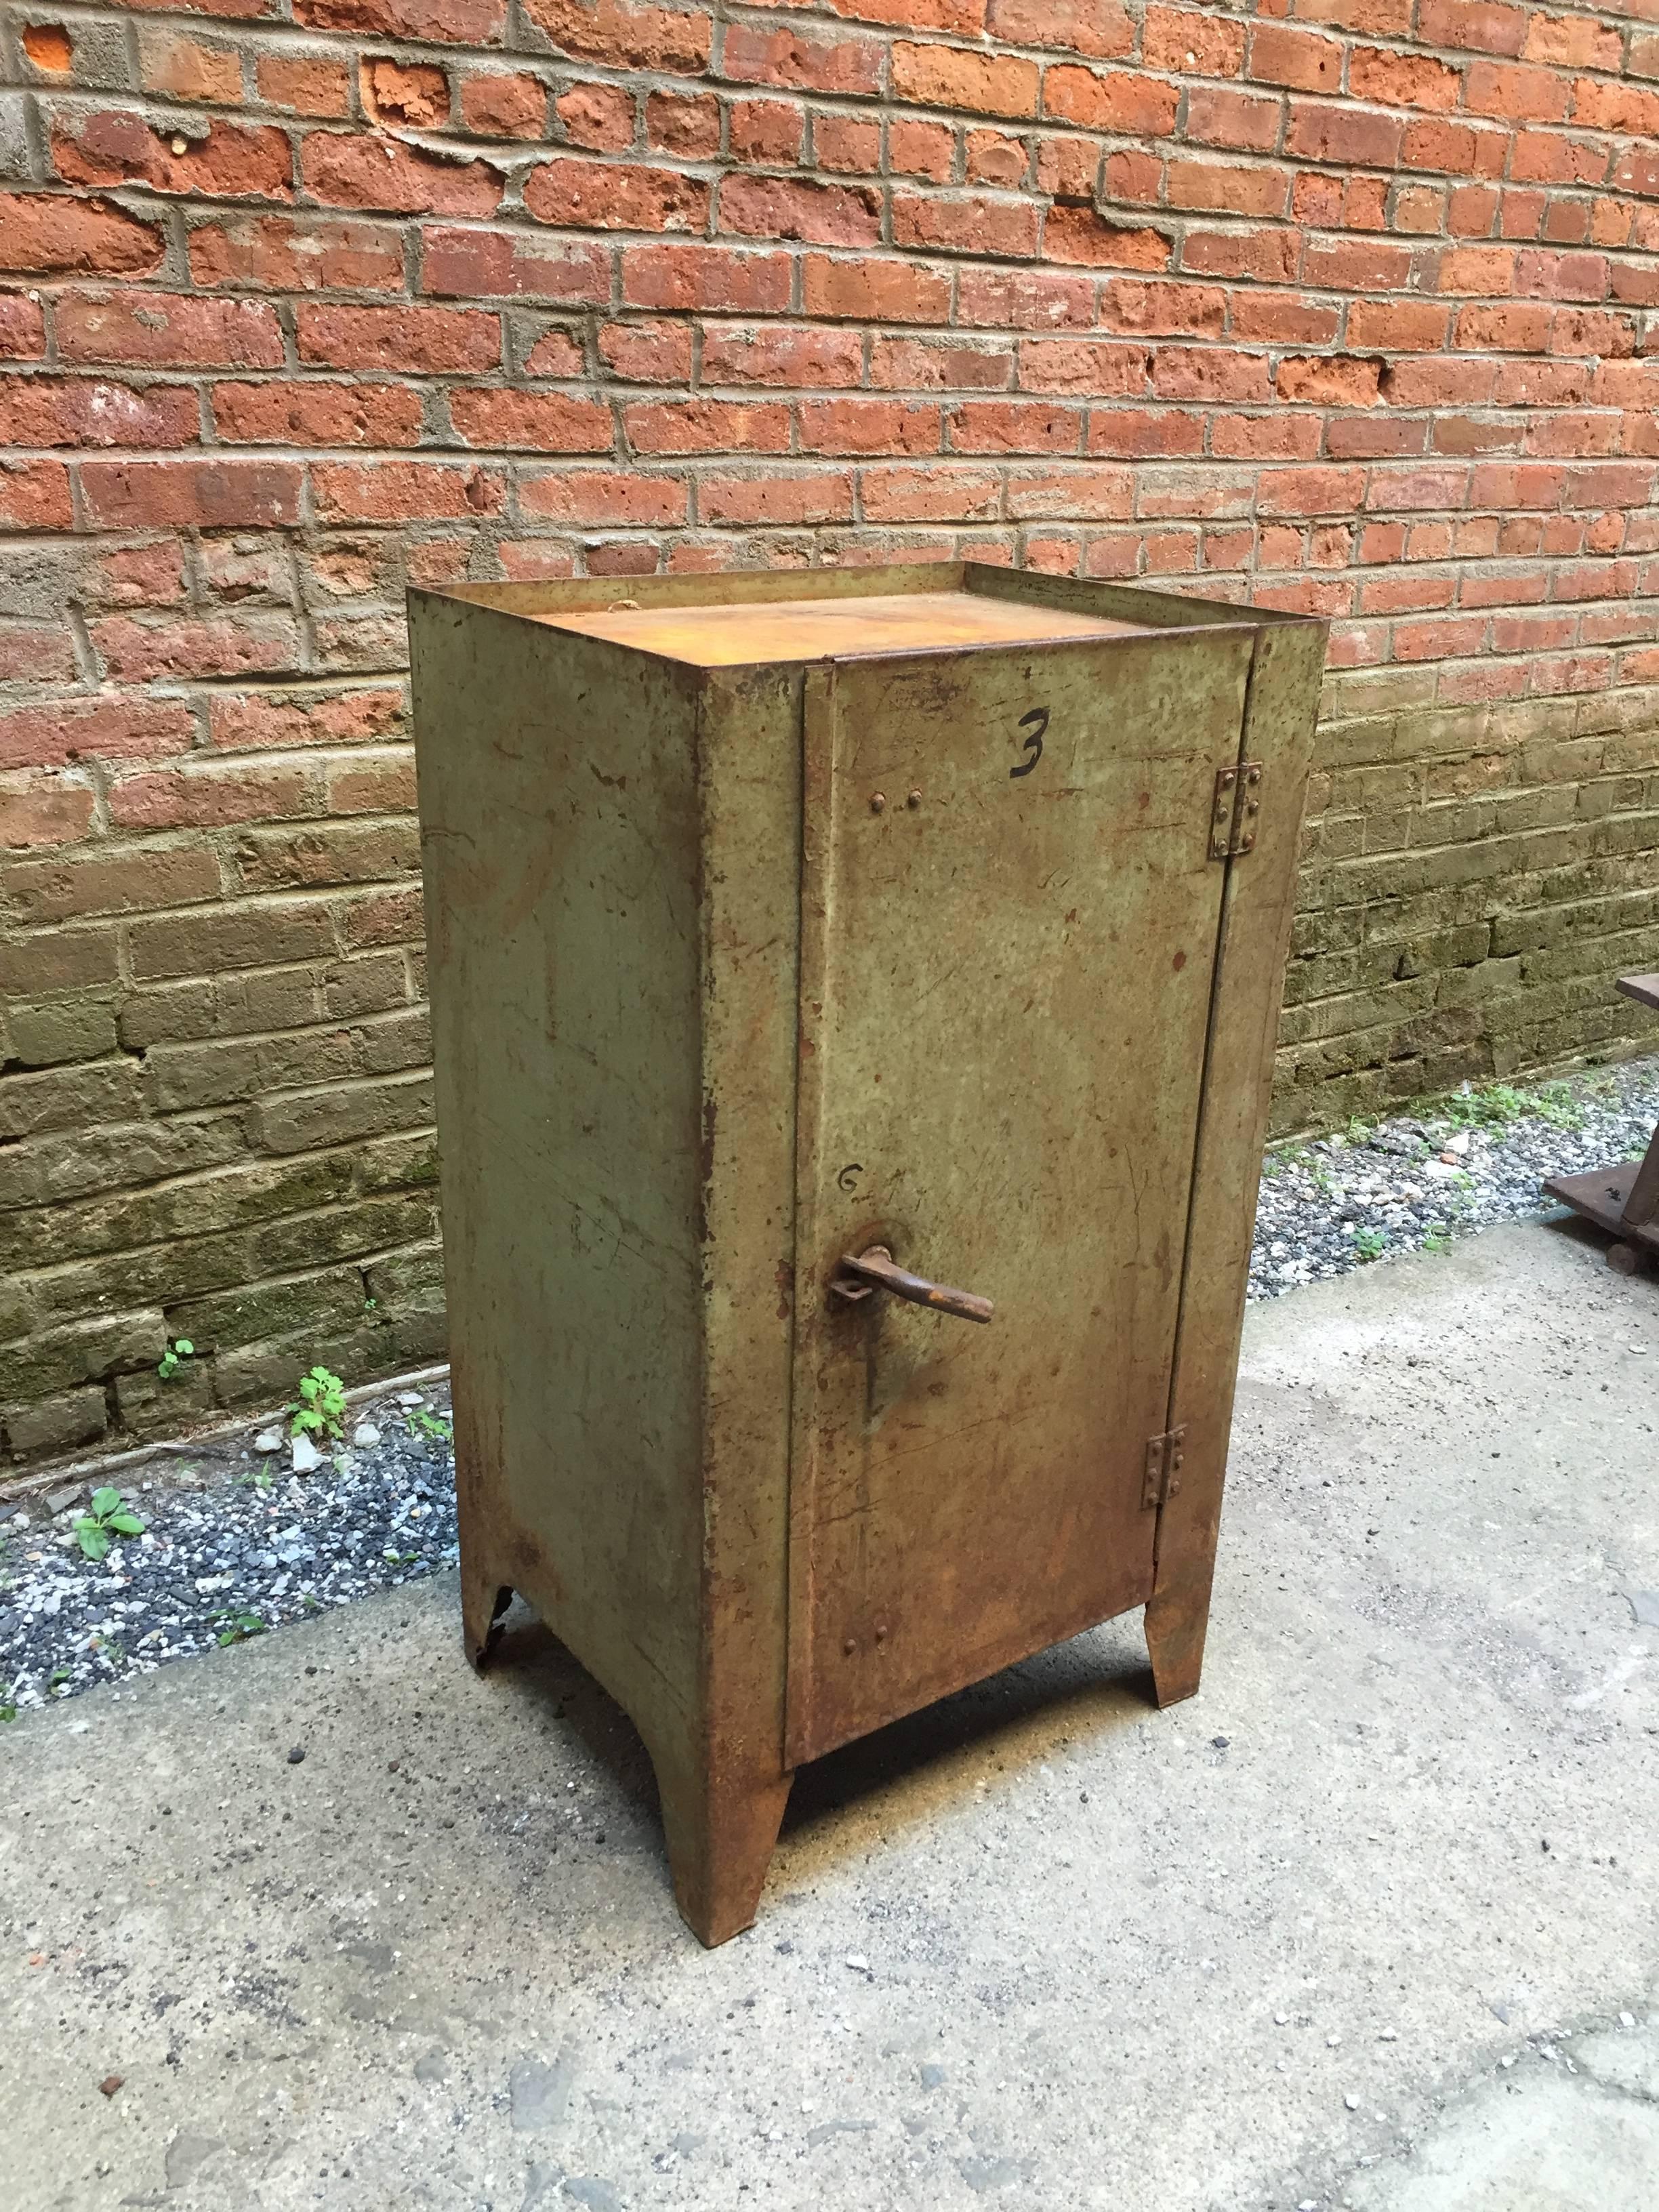 Locking Industrial cabinet that is aged to perfection. Overall rust and Industrial green chipped paint. Spectacular twist handle, circa 1930-1940.